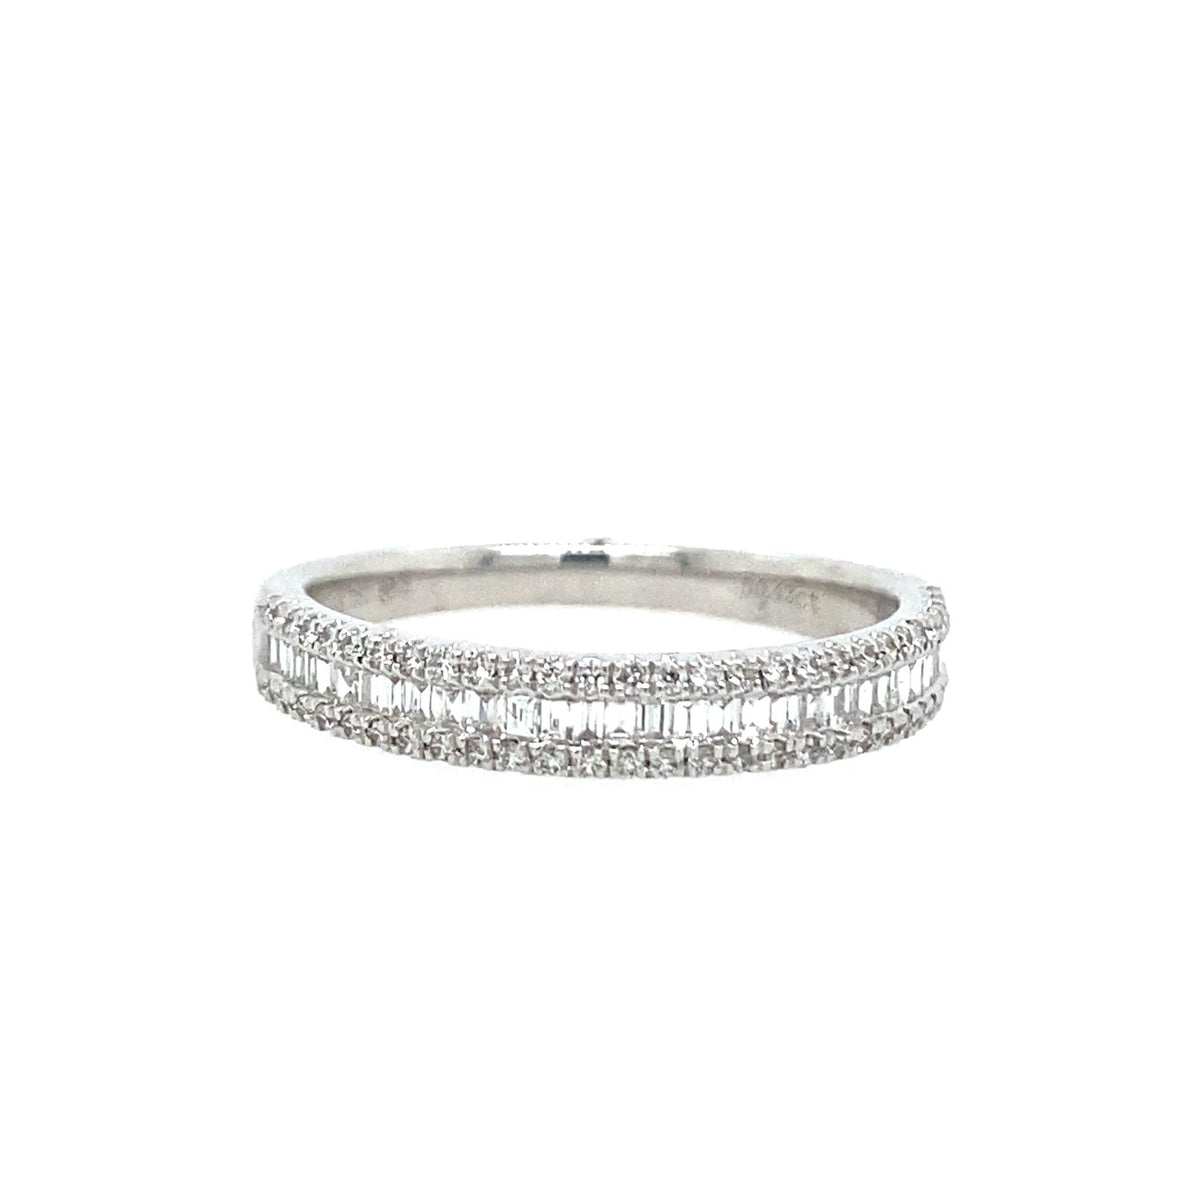 18Kt White Gold Stackable Wedding Ring With 0.44cttw Natural Diamonds